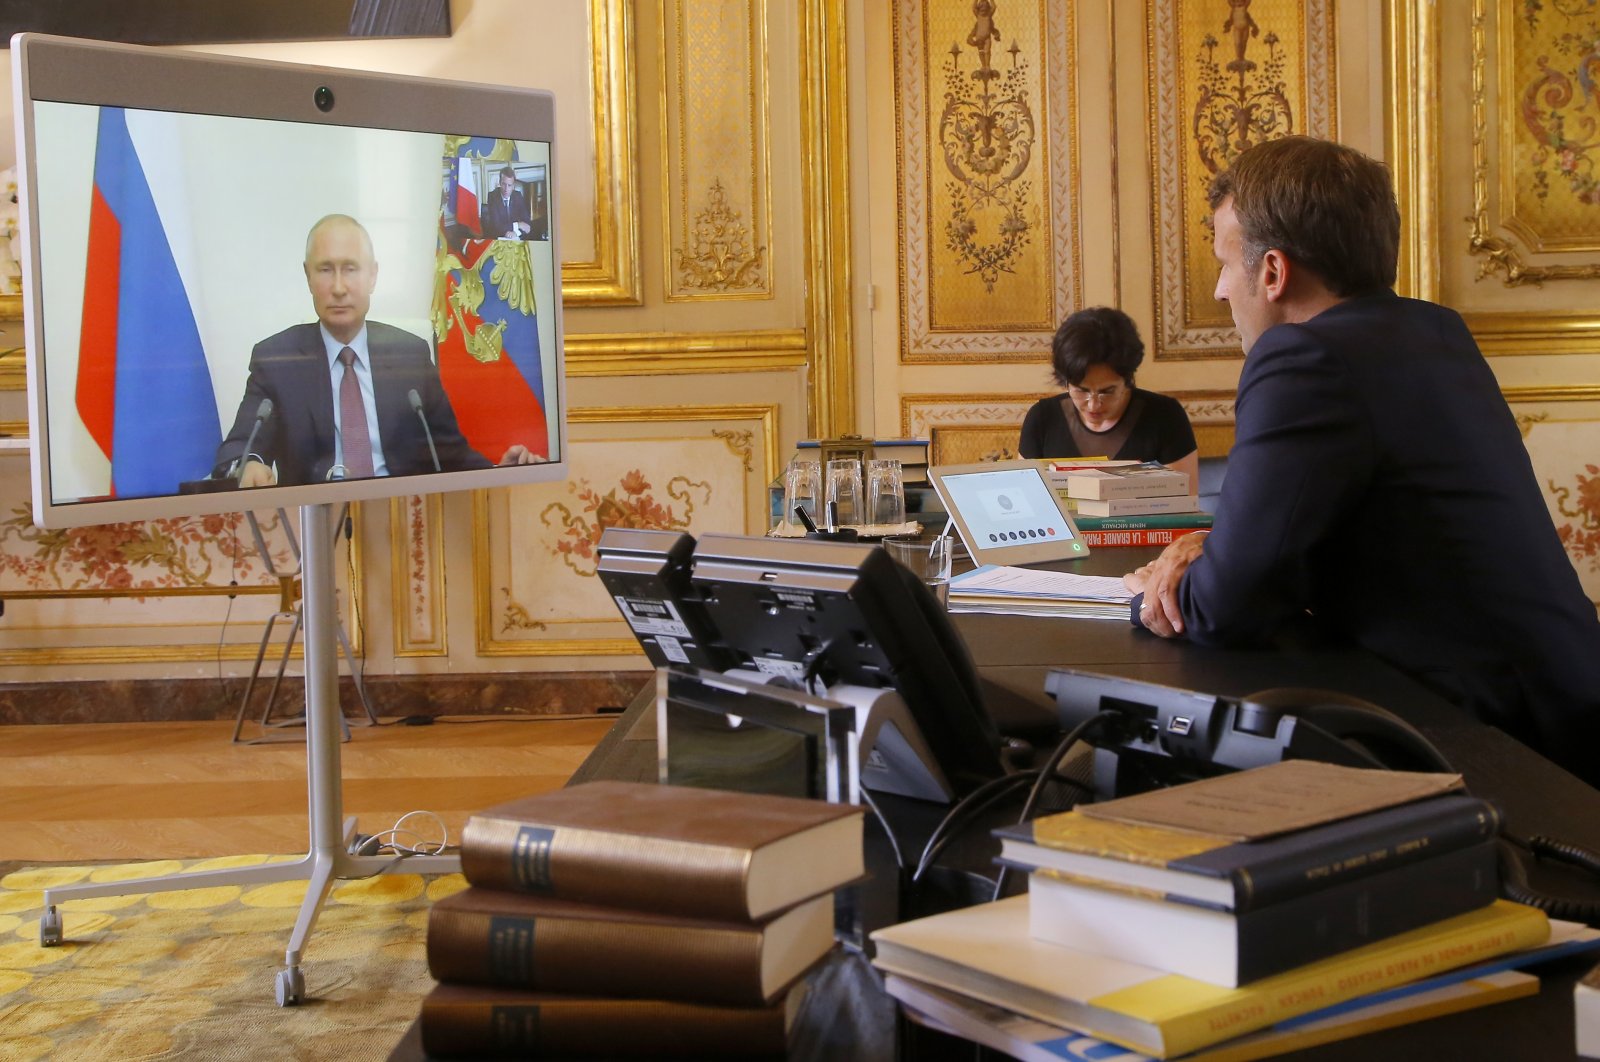 French President Emmanuel Macron talks to Russian President Vladimir Putin during a video conference at the Elysee Palace in Paris, France, June 26, 2020. (AP File Photo)